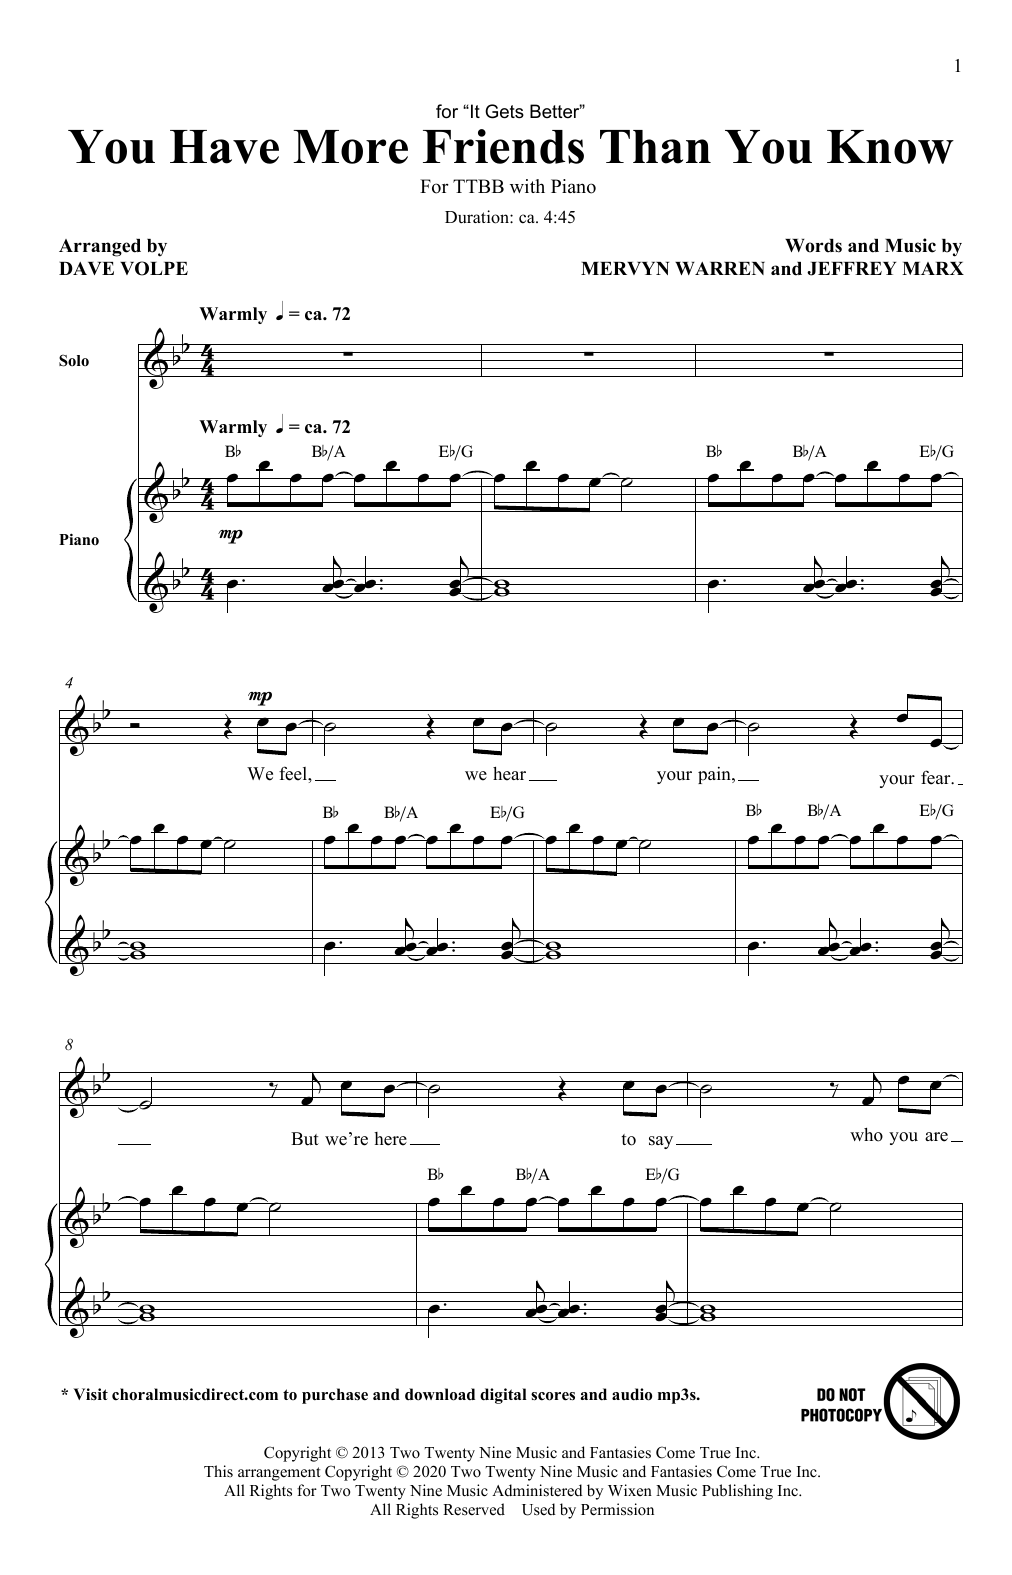 Download Jeff Marx and Mervyn Warren You Have More Friends Than You Know (ar Sheet Music